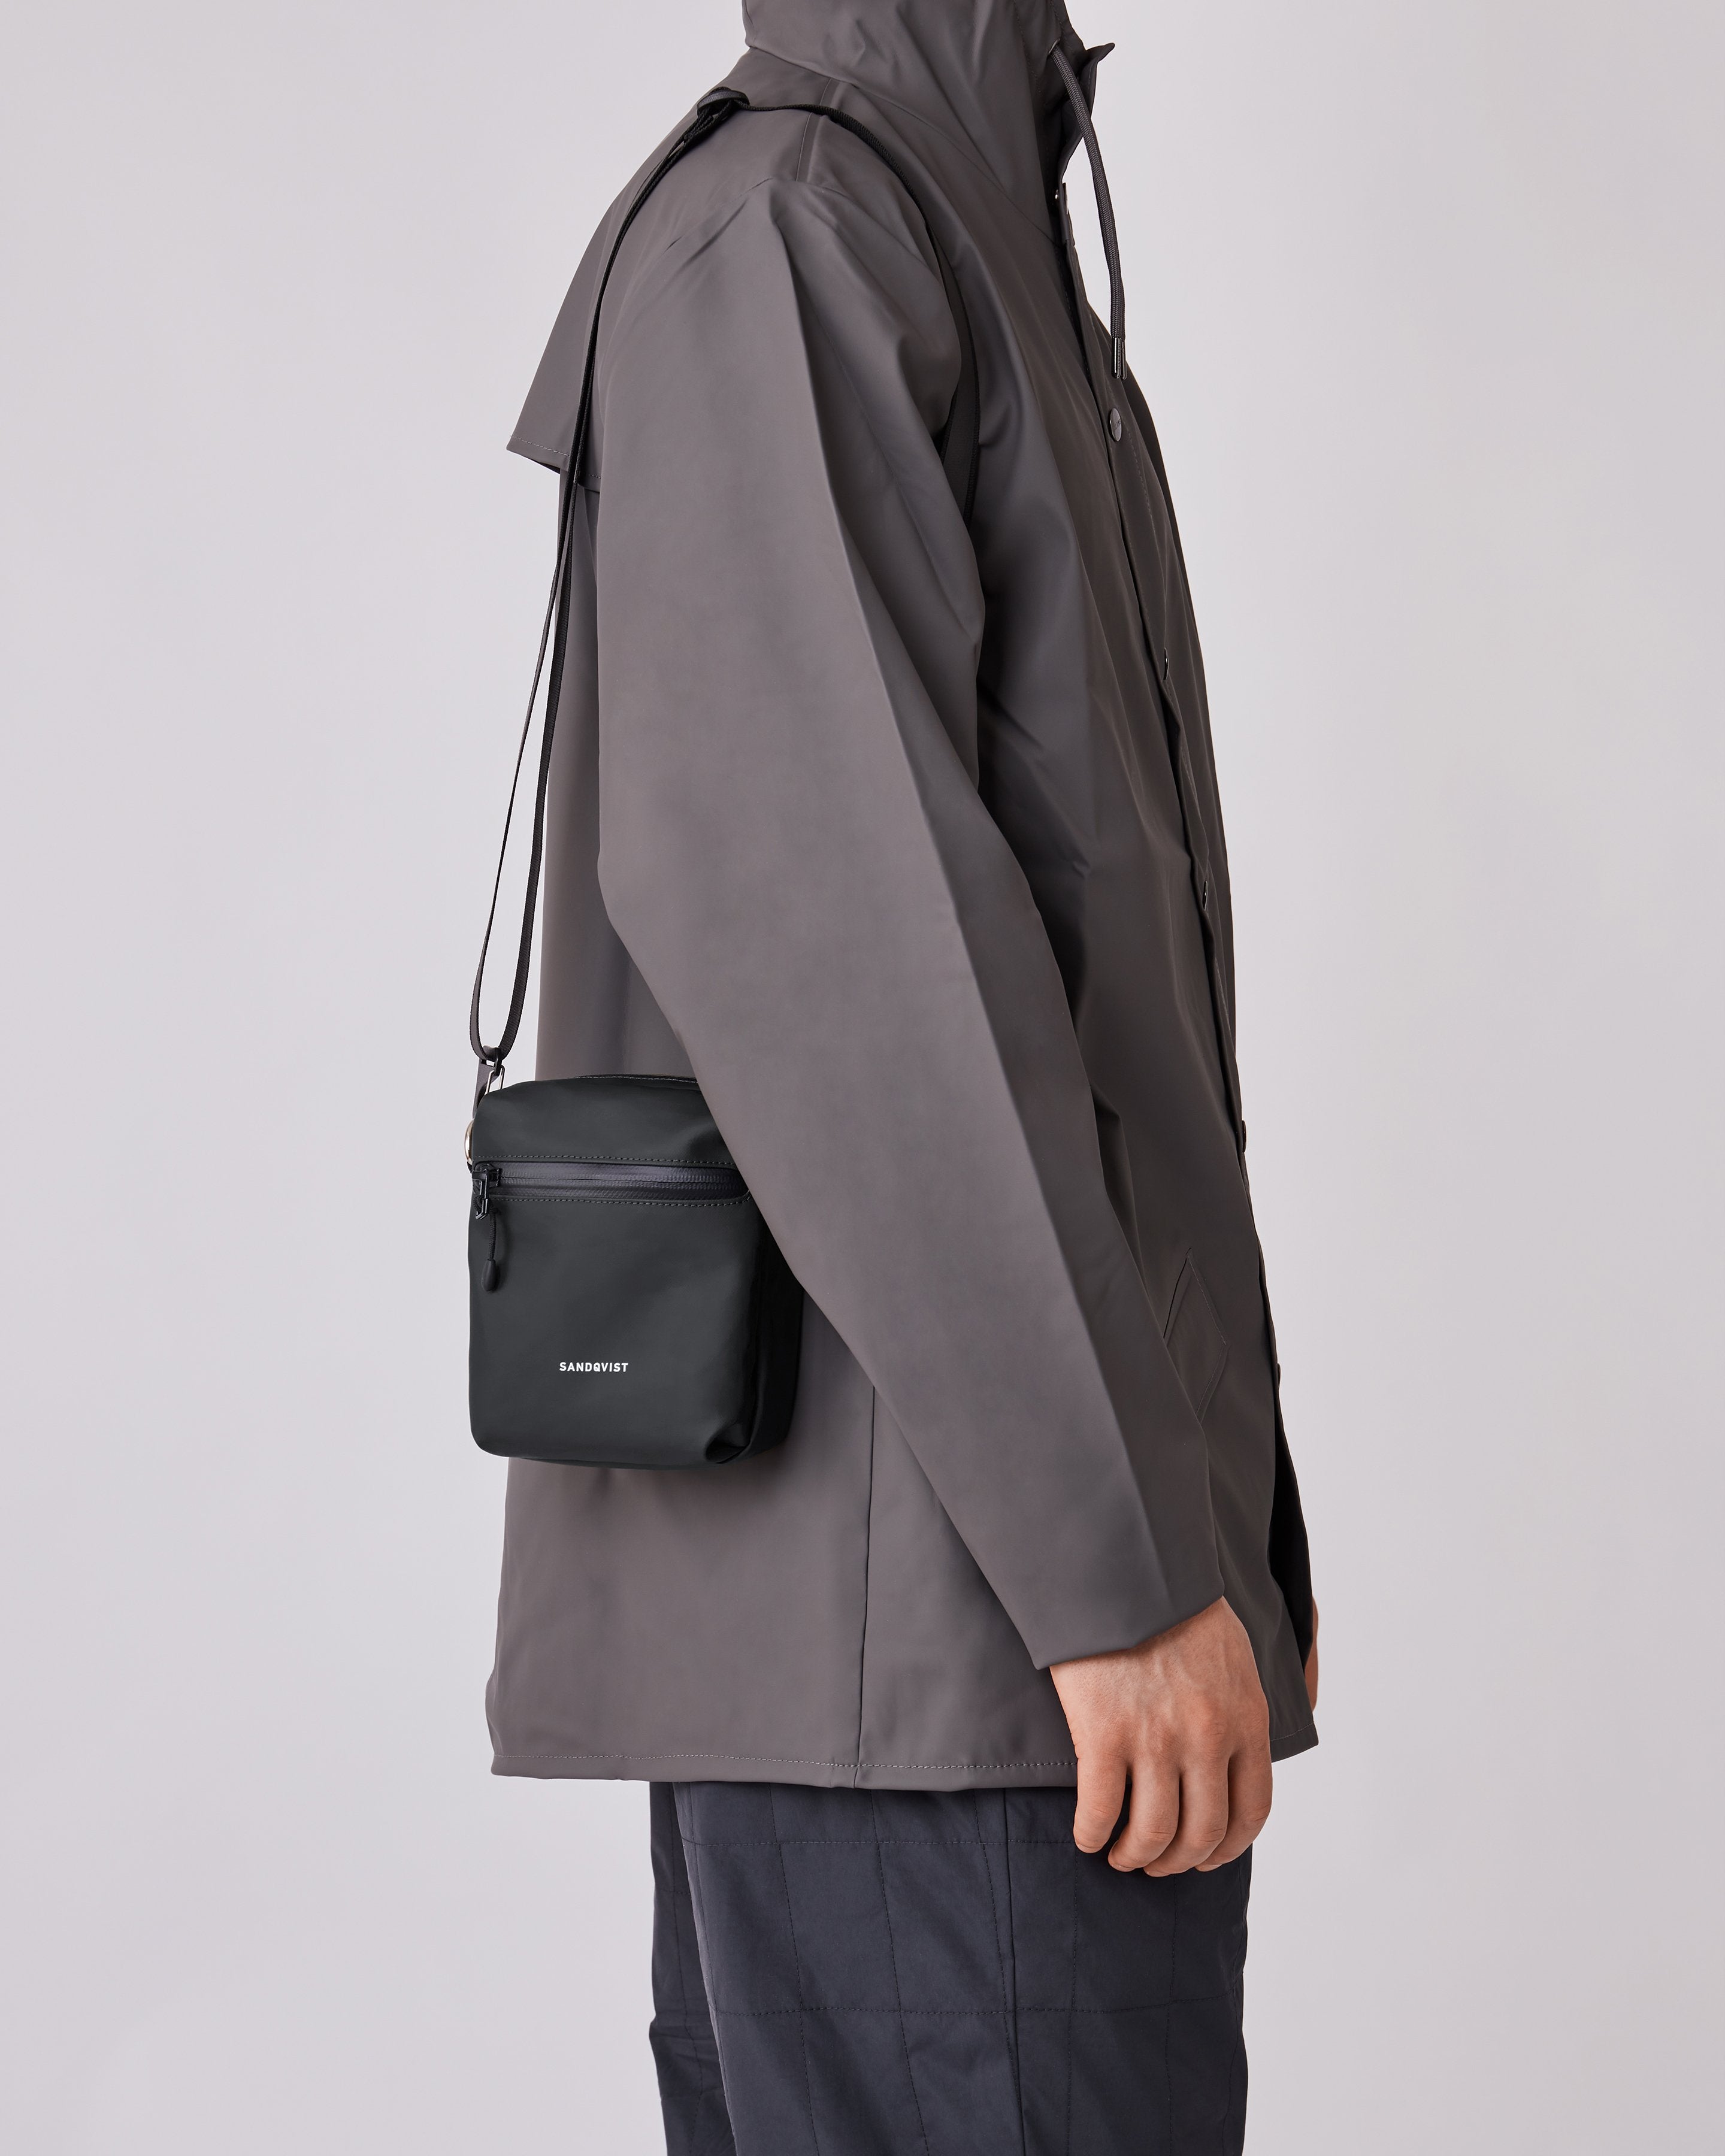 Sandqvist Poe Shoulder Bag in Black SQA1786 | Shop from eightywingold an official brand partner for Sandqvist Canada and US. 